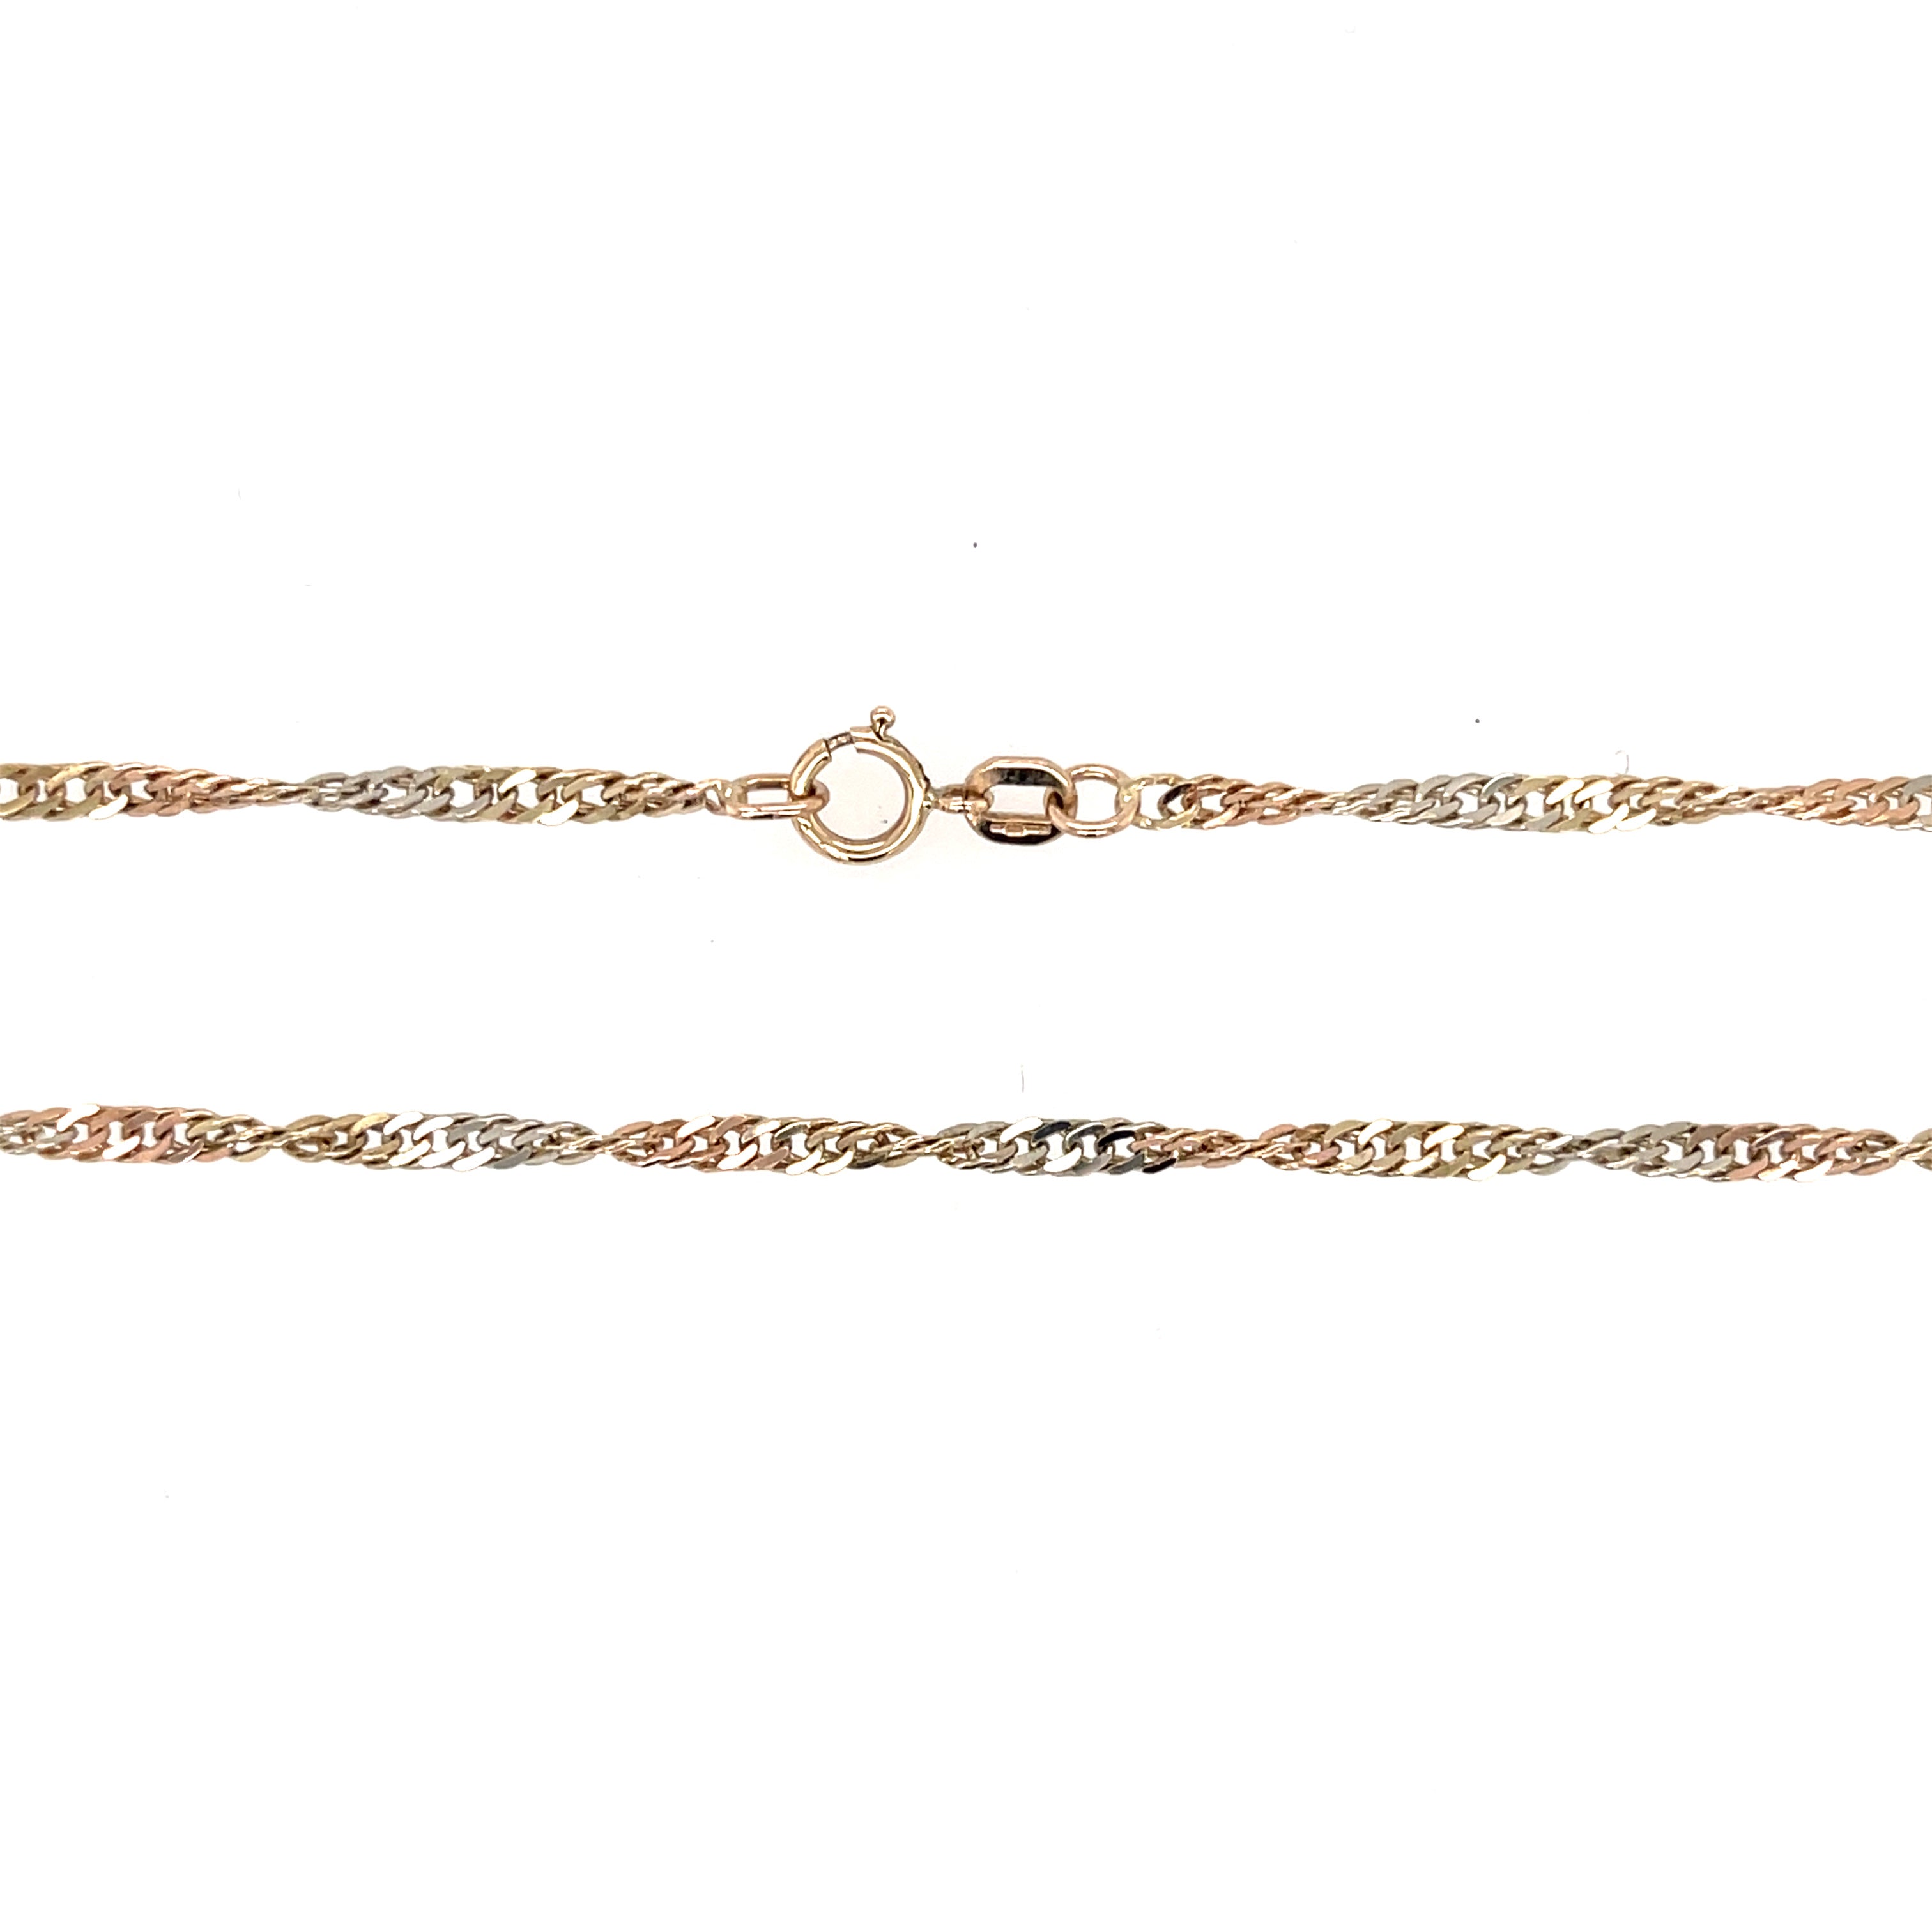 9ct Yellow, White & Rose Gold 16" Singapore Link Chain - 4.10g SOLD